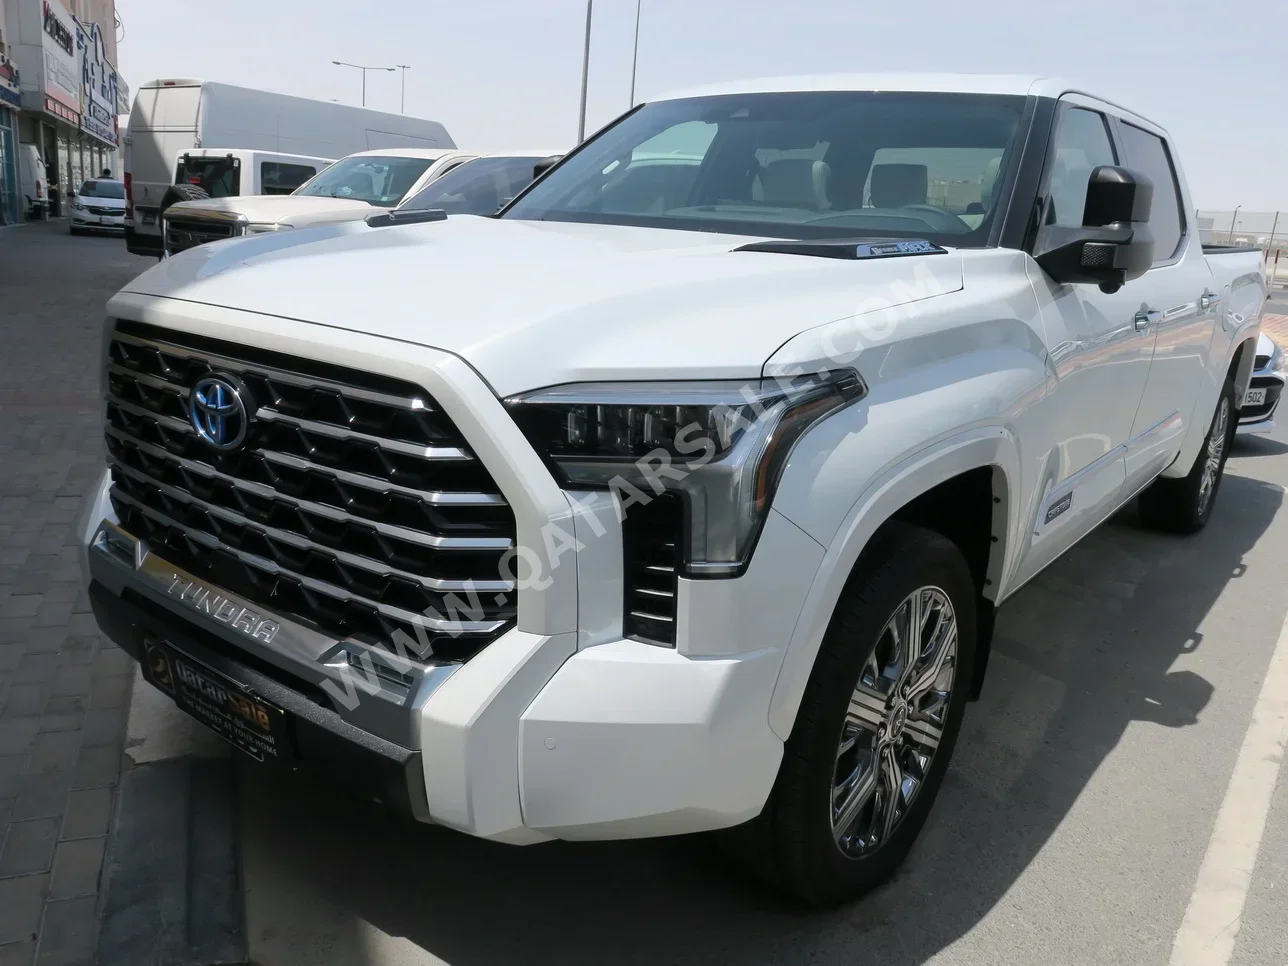 Toyota  Tundra  2024  Automatic  0 Km  6 Cylinder  Four Wheel Drive (4WD)  Pick Up  White  With Warranty